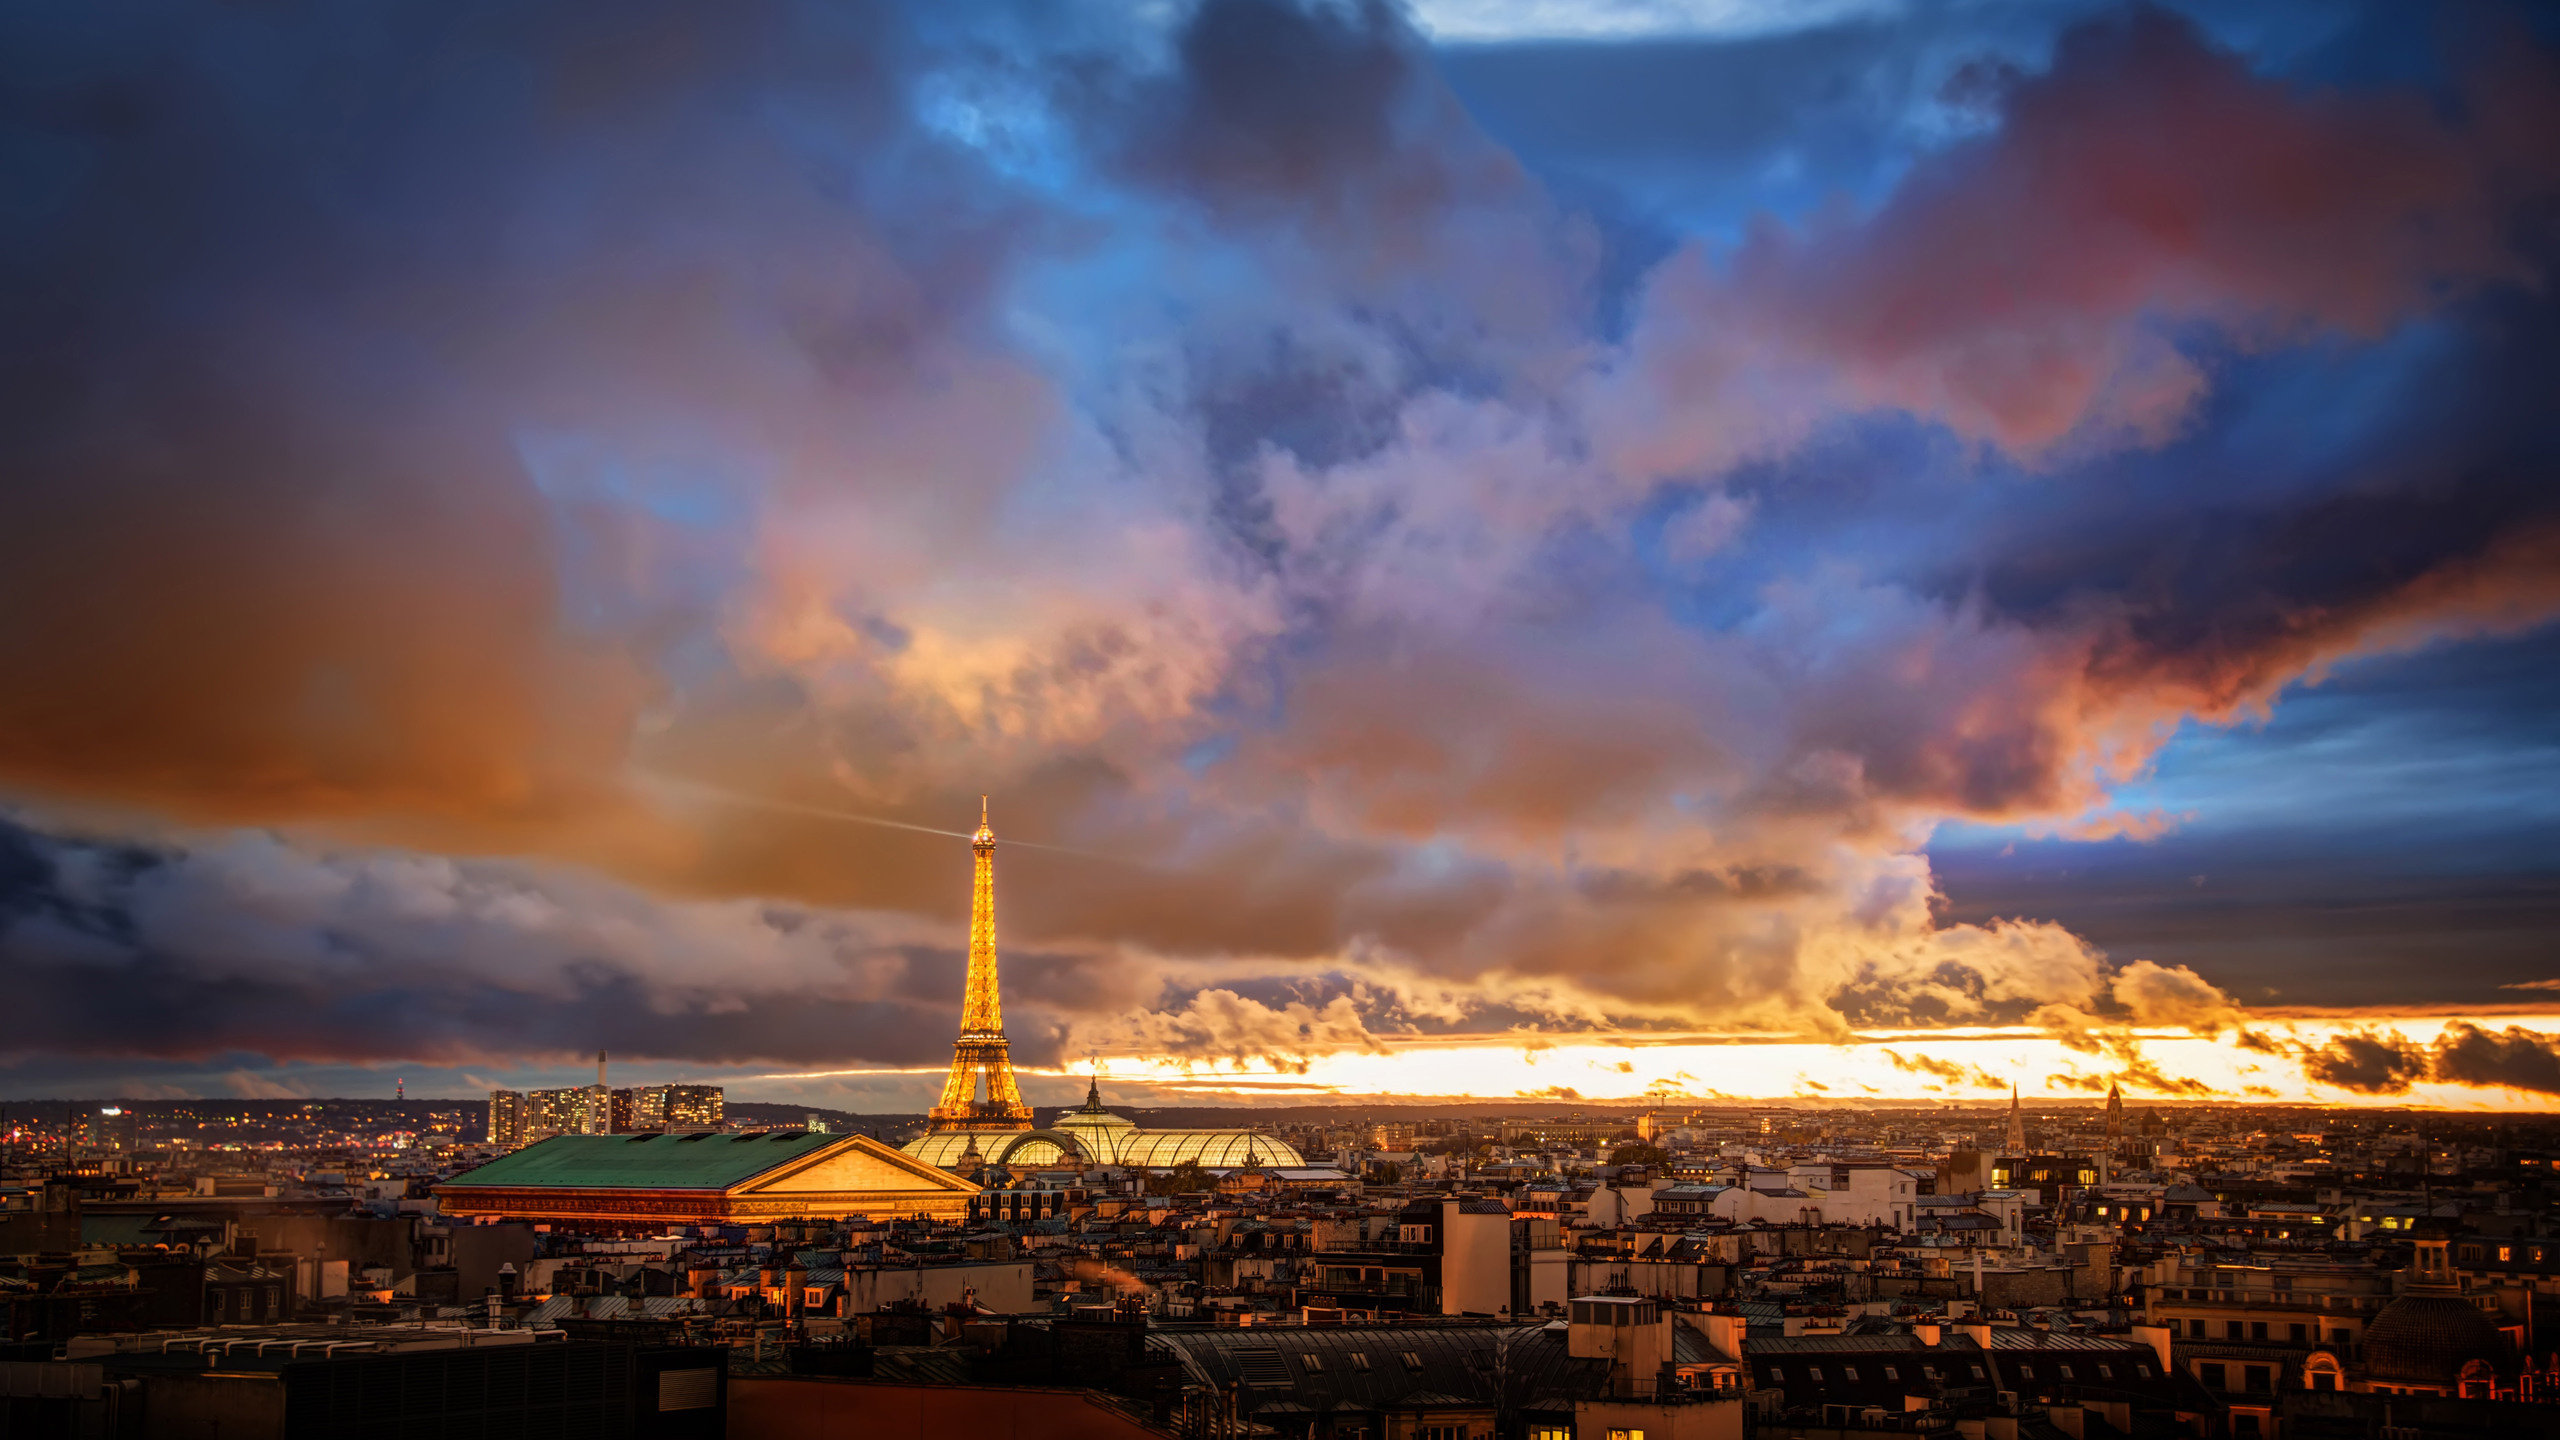 Paris: A major international air transport hub with the 5th busiest airport system in the world. 2560x1440 HD Wallpaper.